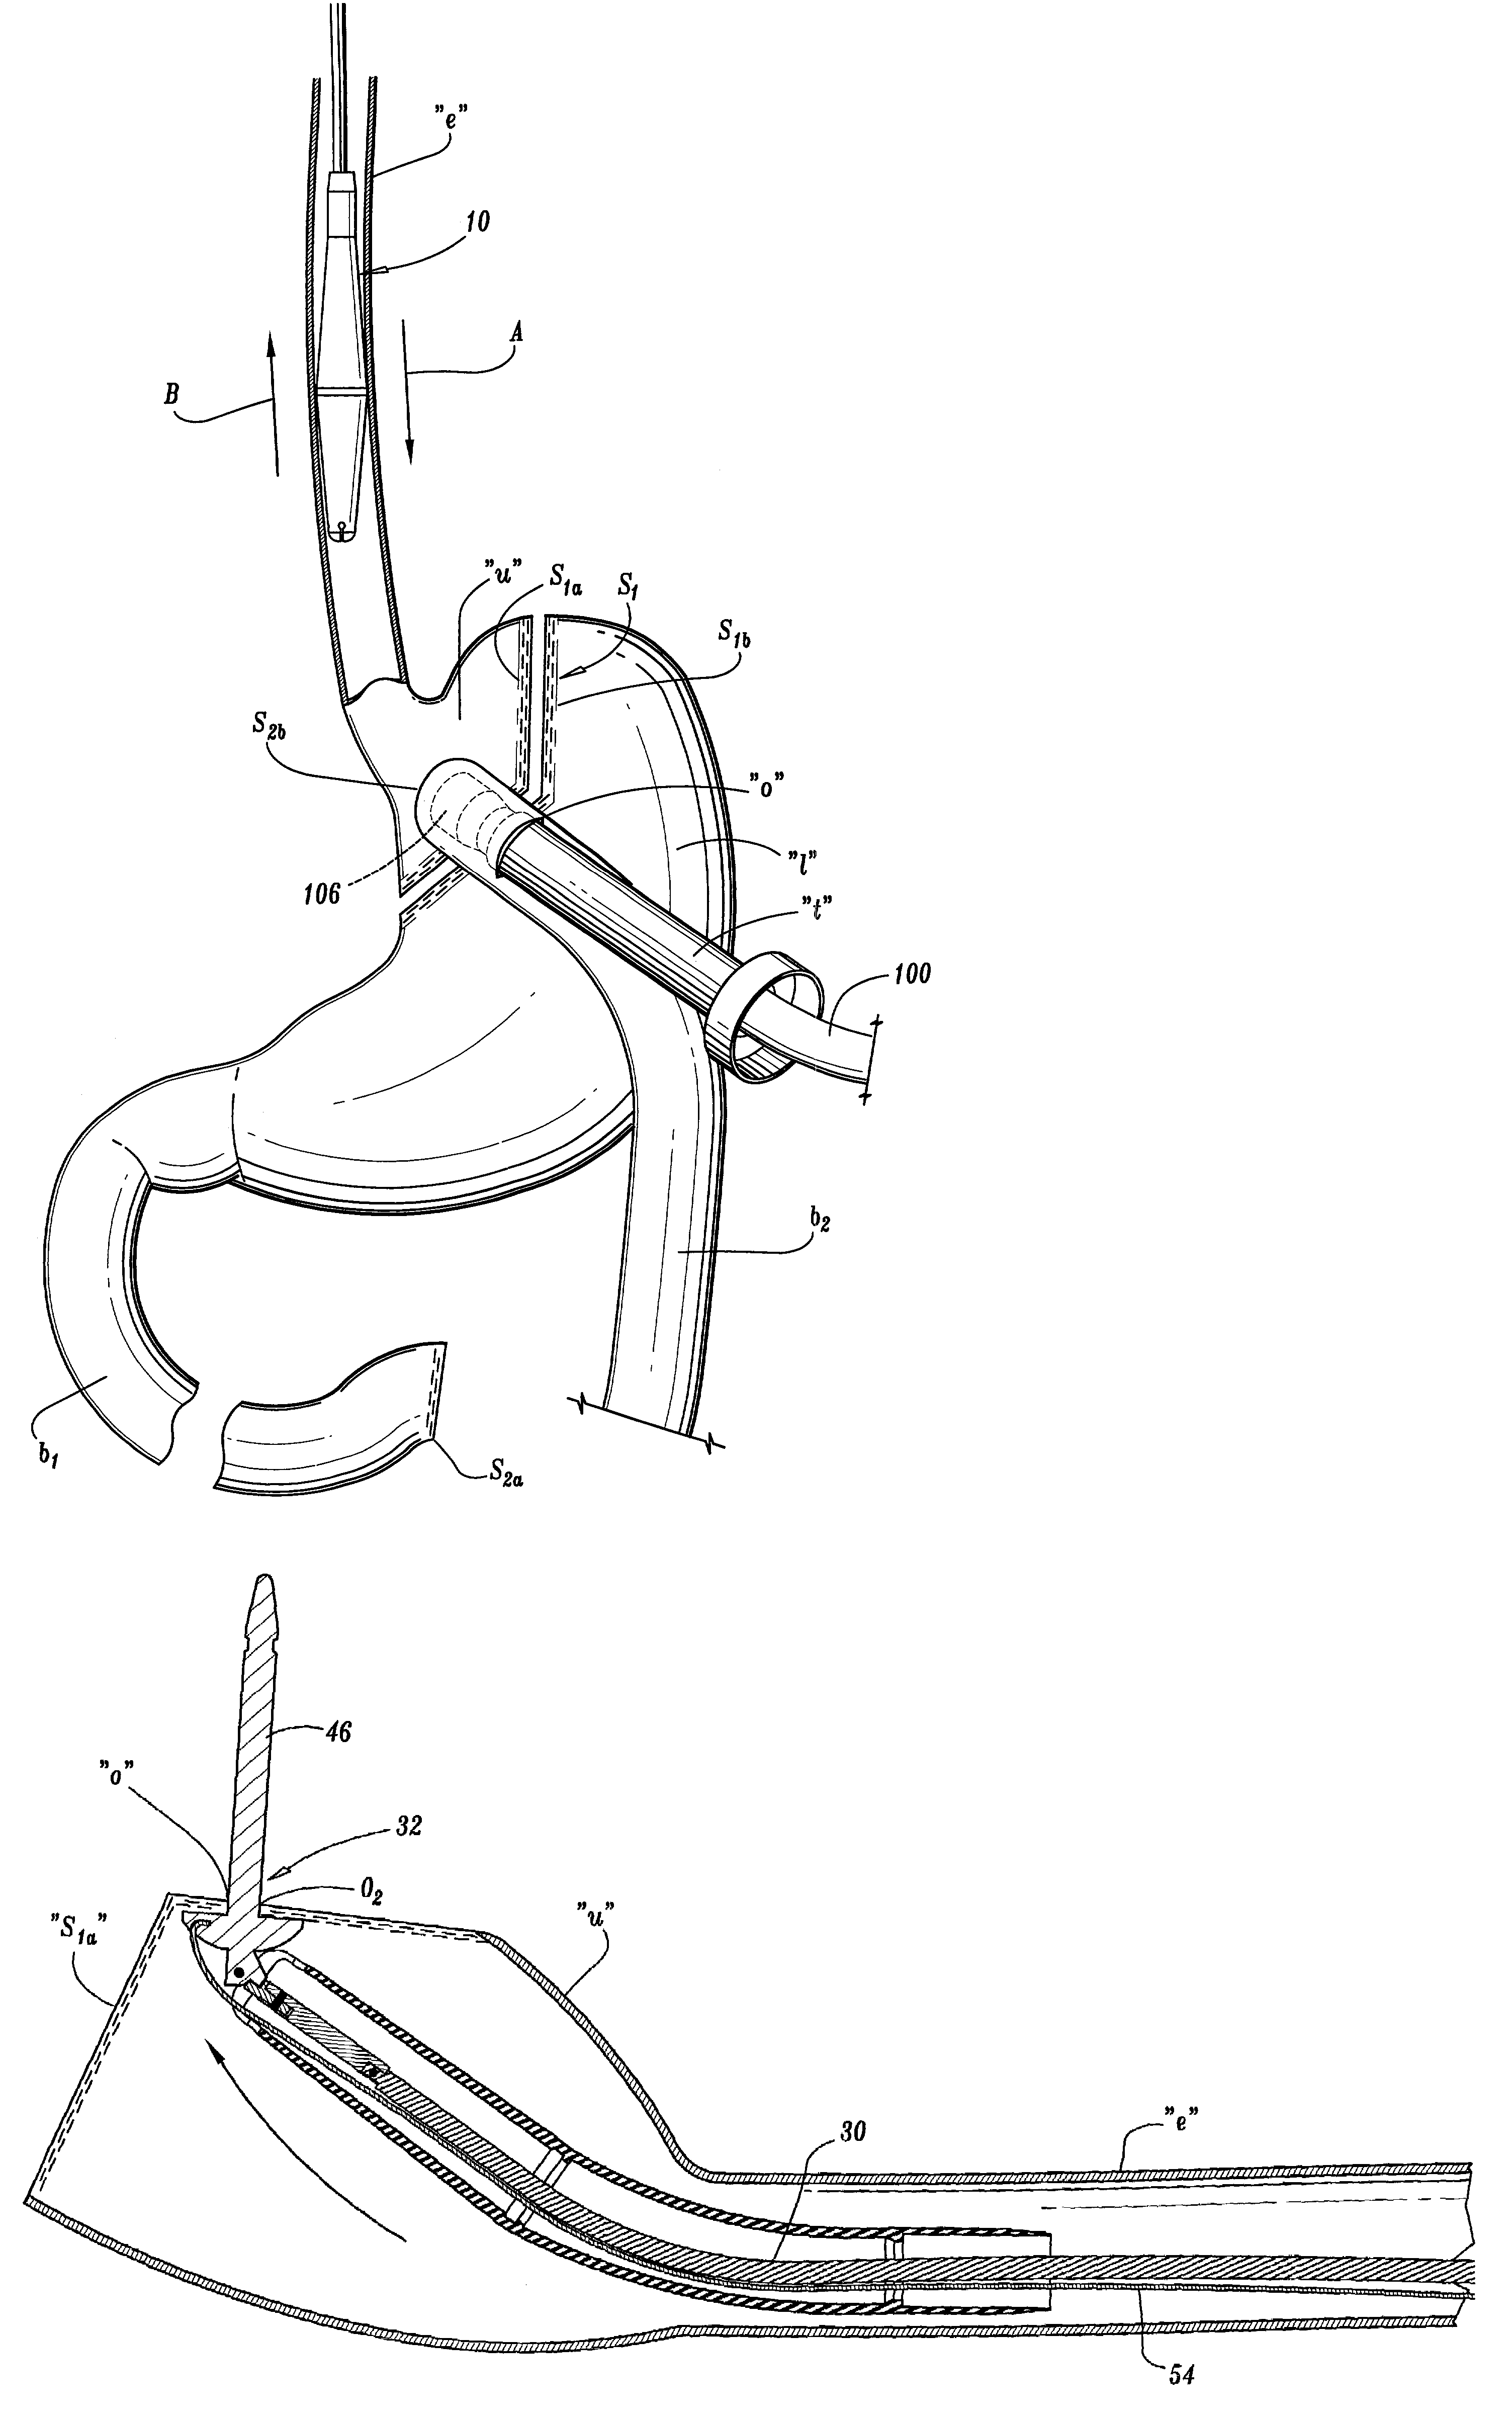 Apparatus and method for performing a bypass procedure in a digestive system